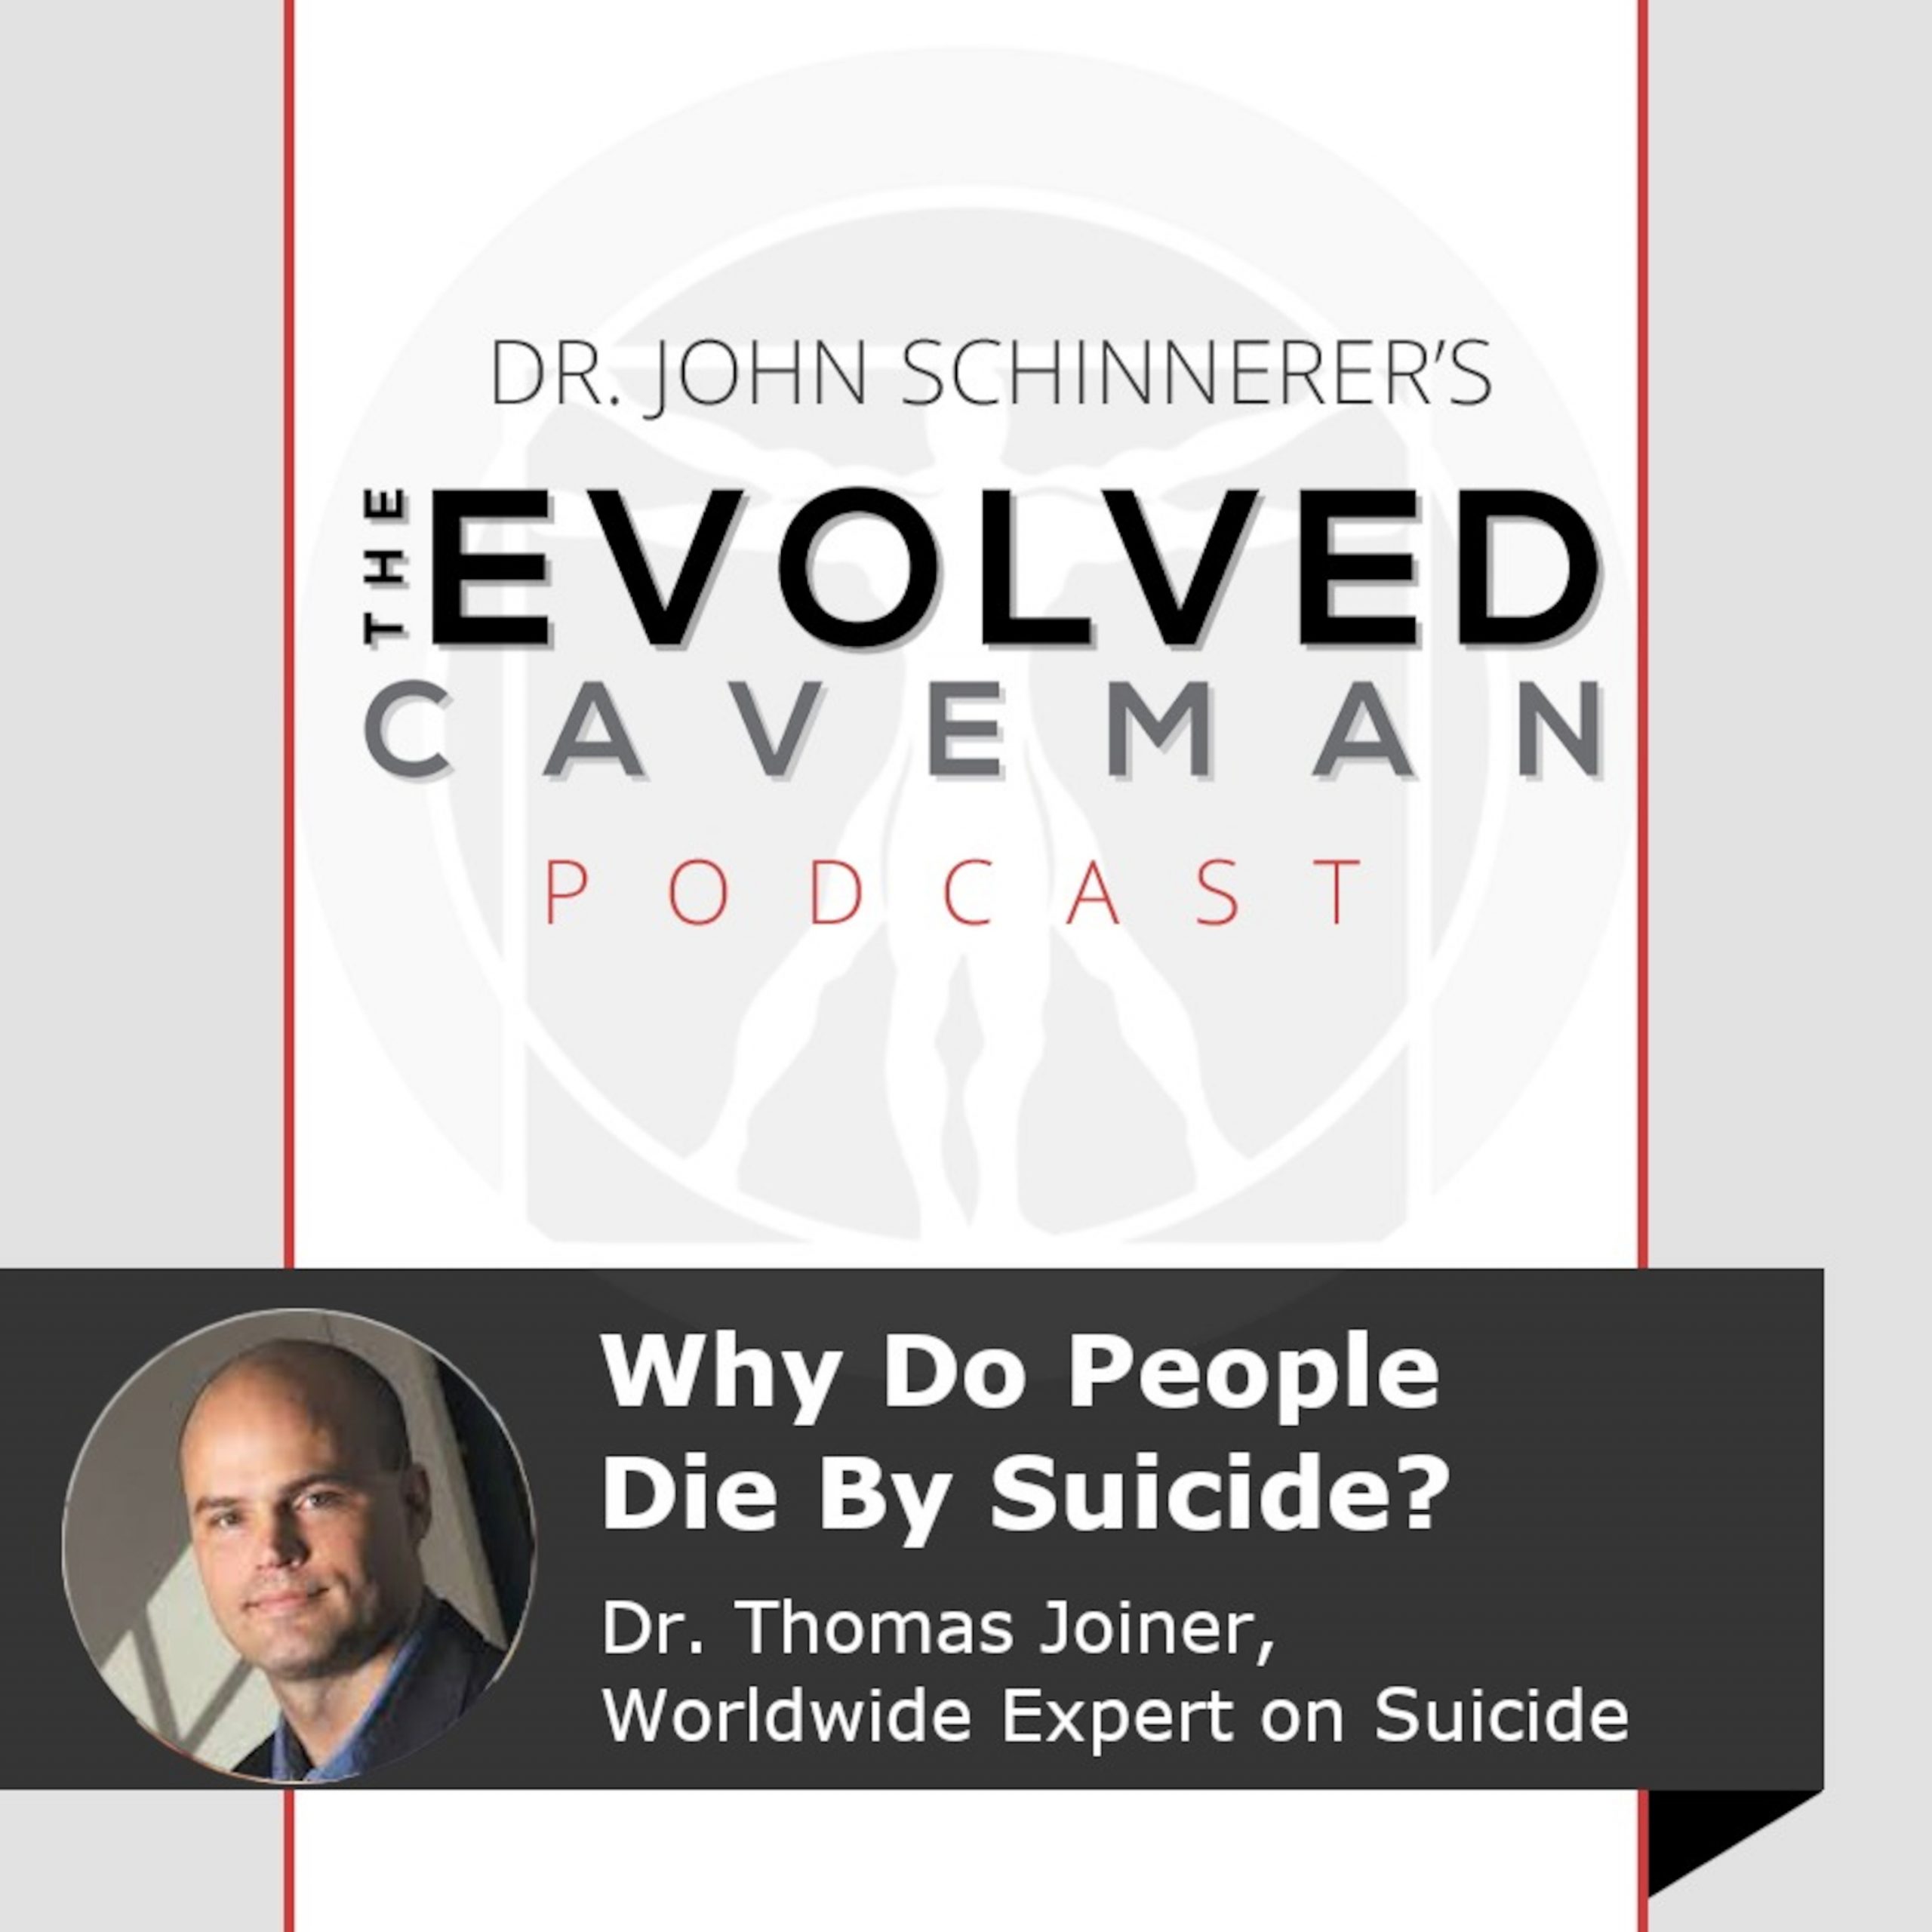 Why Do People Die By Suicide?